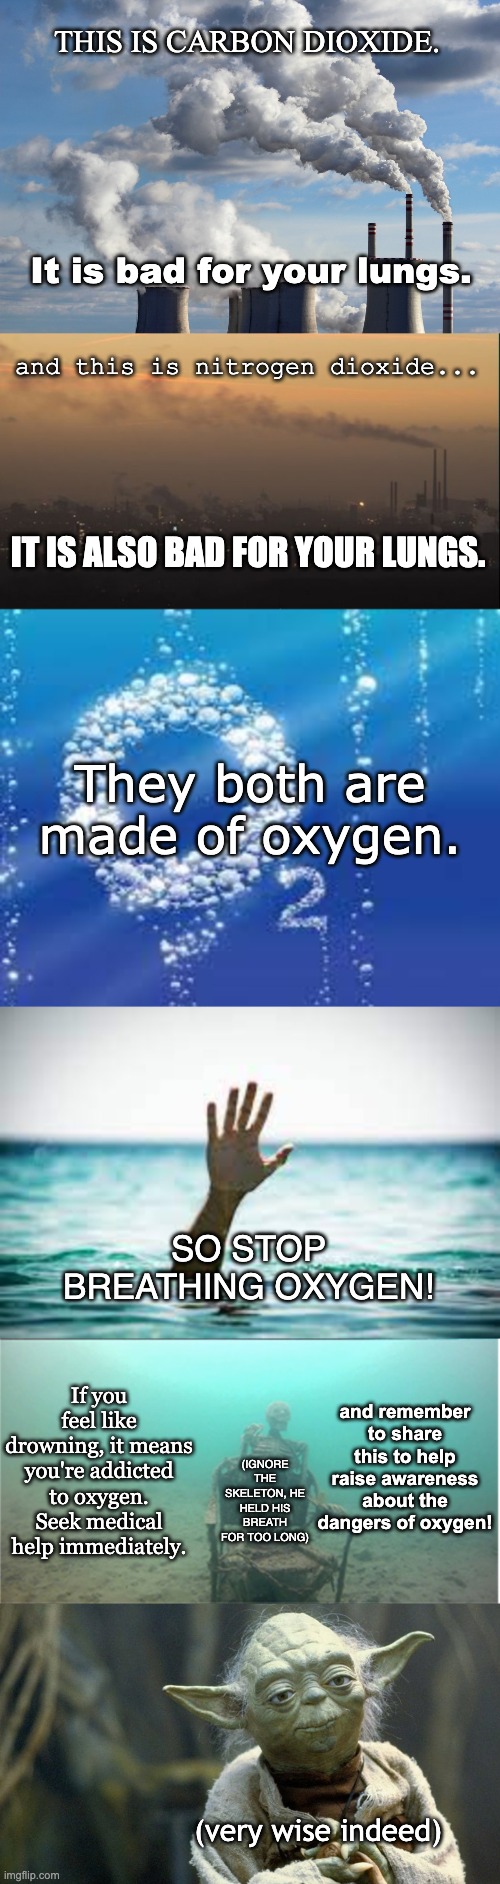 CO2 and NO2 | THIS IS CARBON DIOXIDE. It is bad for your lungs. and this is nitrogen dioxide... IT IS ALSO BAD FOR YOUR LUNGS. They both are made of oxygen. SO STOP BREATHING OXYGEN! and remember to share this to help raise awareness about the dangers of oxygen! If you feel like drowning, it means you're addicted to oxygen. Seek medical help immediately. (IGNORE THE SKELETON, HE HELD HIS BREATH FOR TOO LONG); (very wise indeed) | image tagged in memes,oxygen,nitrogen,pollution,yoda wisdom | made w/ Imgflip meme maker